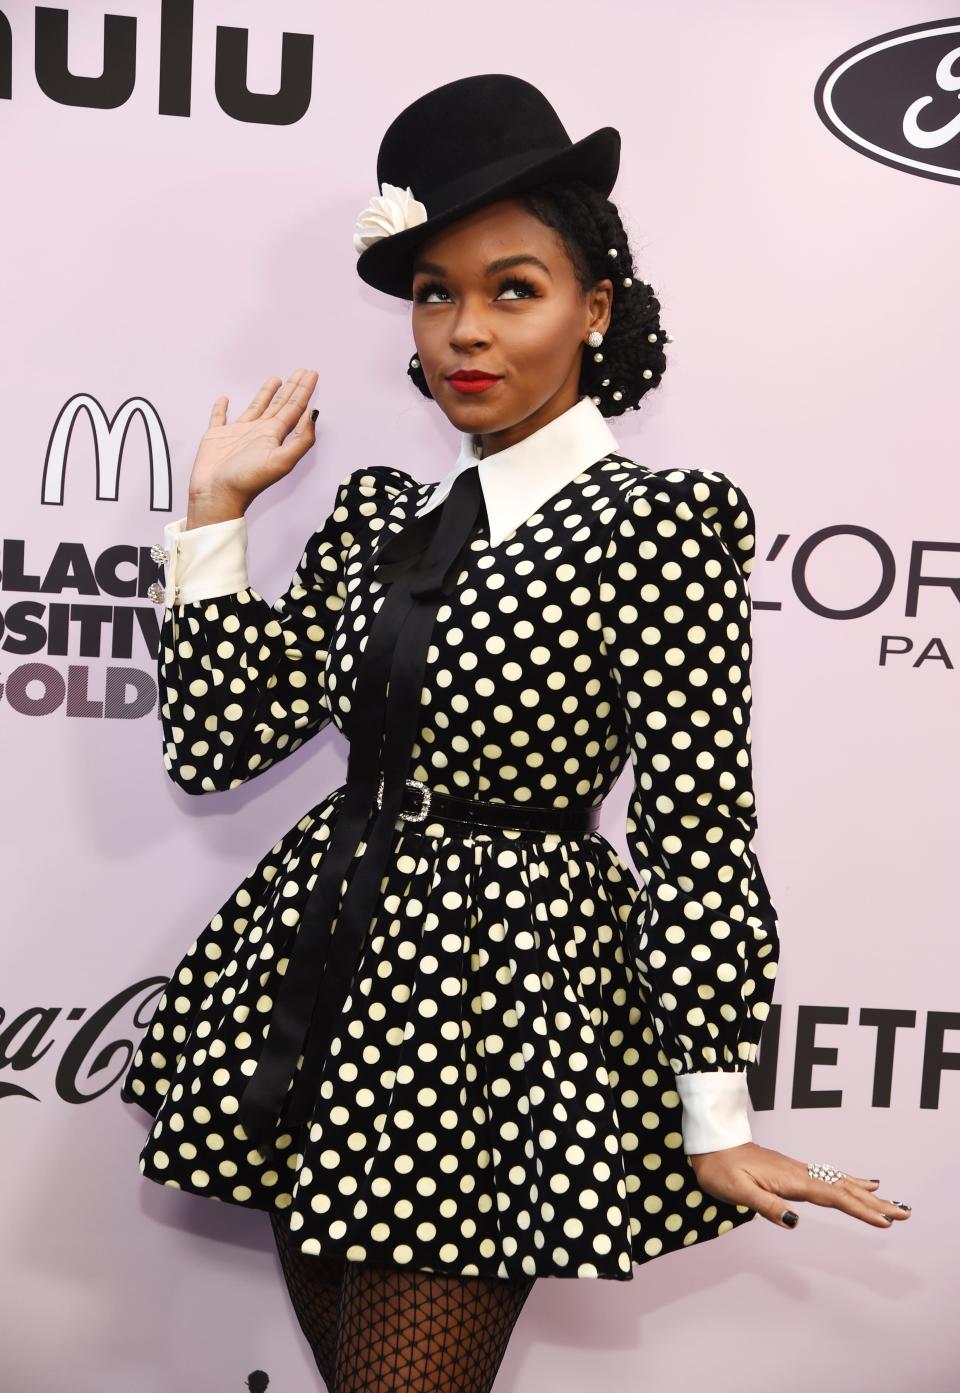 This year's four cover stars include actor Wilson Cruz, Black Lives Matter organizer Janaya Khan, actor and director Joe Mantello and artist Janelle Monáe (pictured).